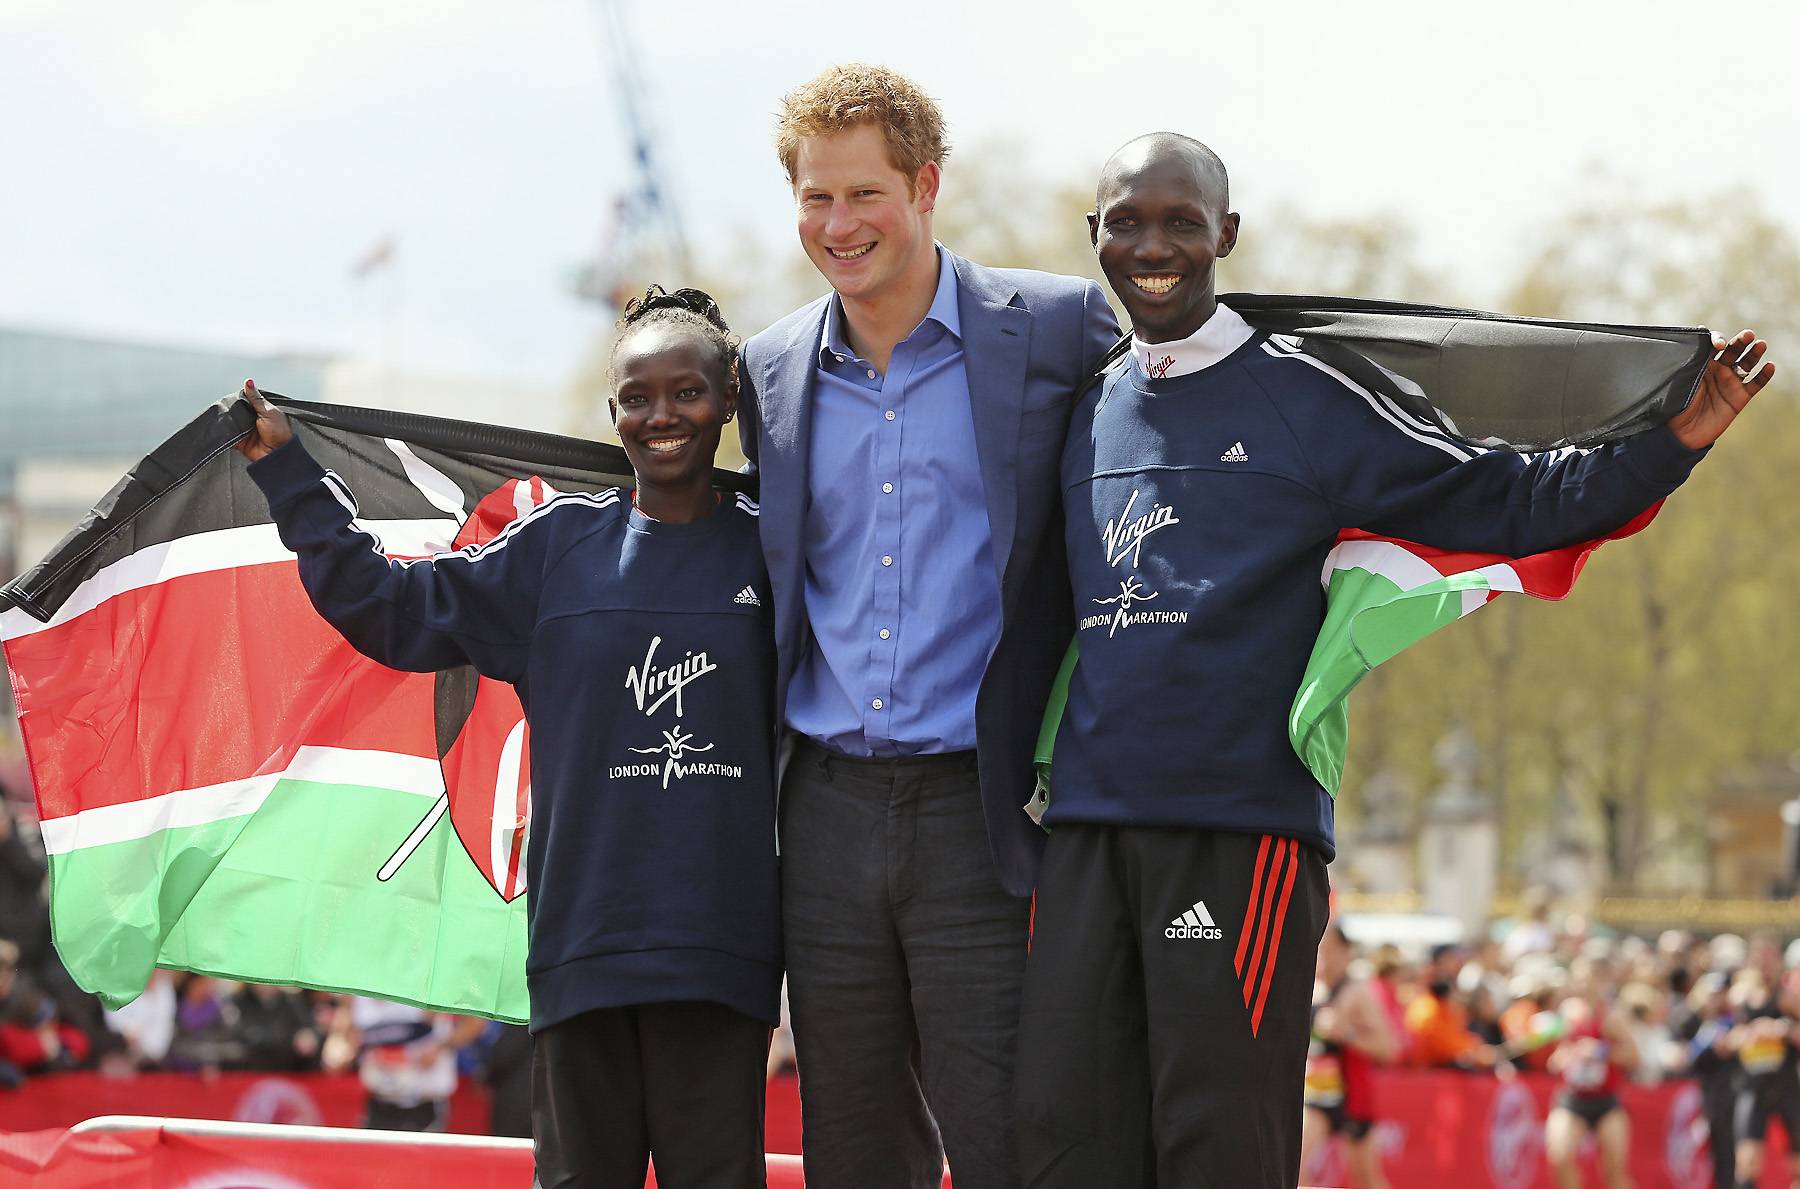 Kenyans Sweep London&nbsp;Marathon - Just months ahead of the 2012 Summer Olympic Games, Kenyans Wilson Kipsang and Mary Keitany sprinted to victory at the London Marathon Sunday. Kipsang, the second-fastest marathon runner ever, won the 26.2-mile race for the first time, and Keitany defended her title, winning in 2 hours, 18 minutes and 37 seconds.(Photo: REUTERS/Eddie Keogh )